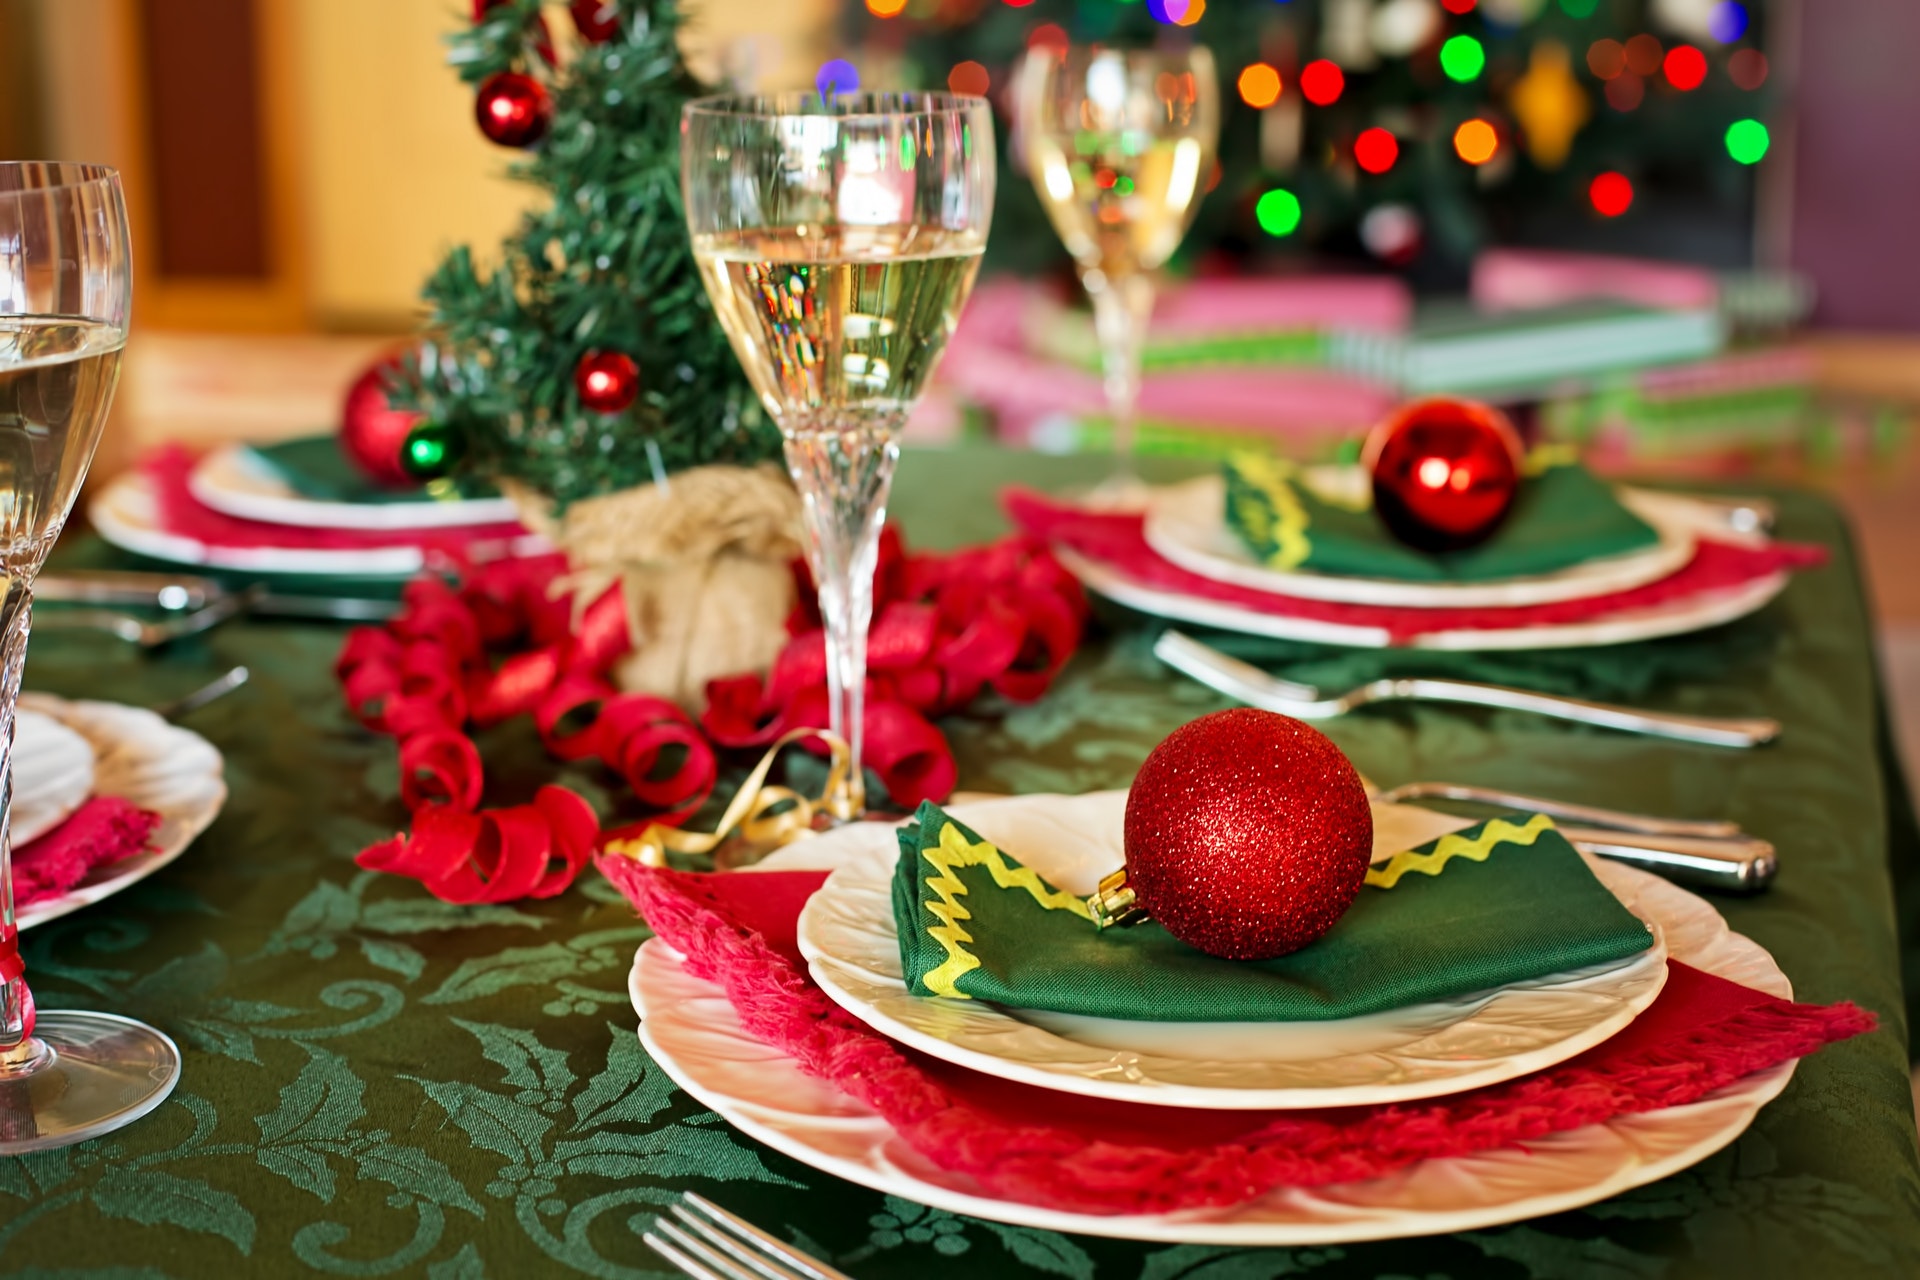 4 Ways for You and Your Family to have a Healthier Christmas